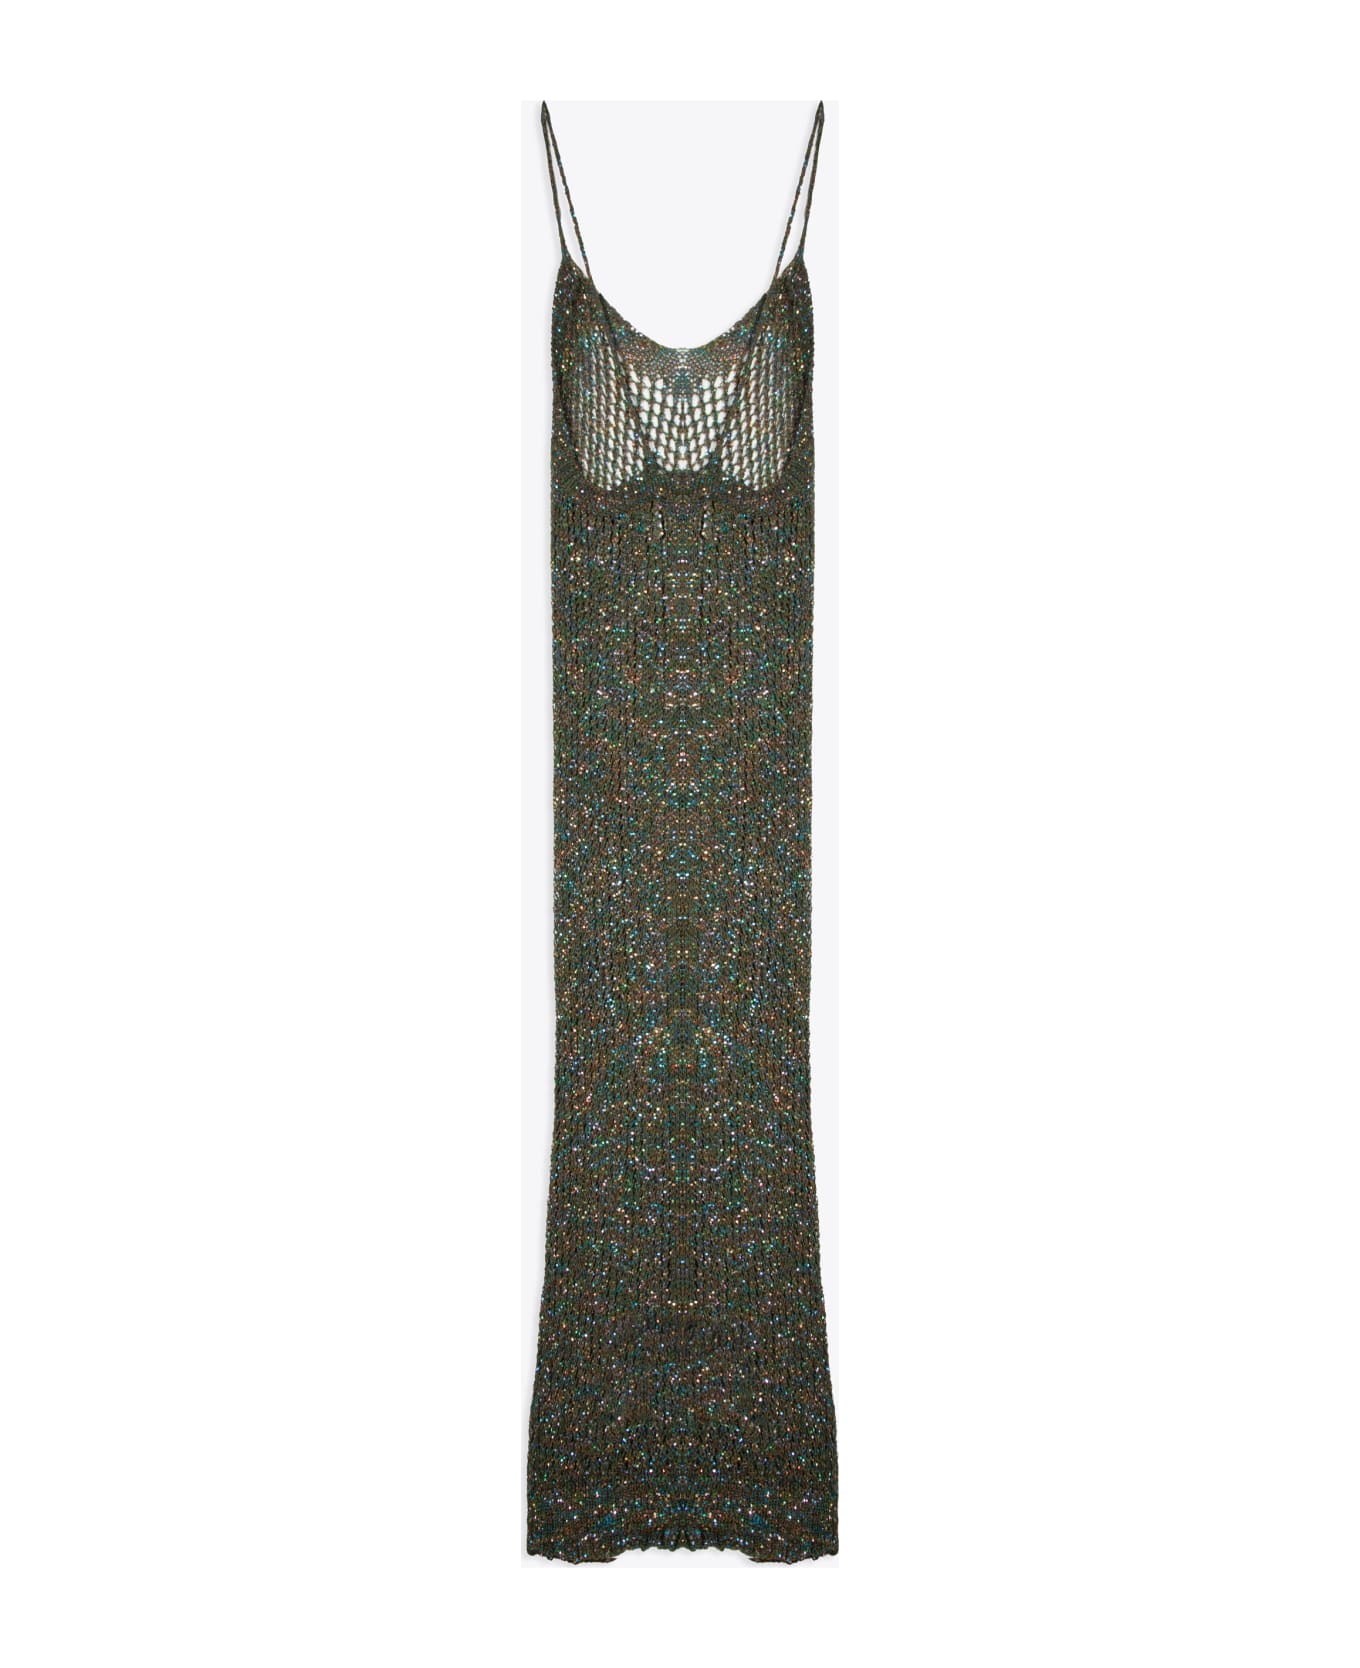 Laneus Pailletes Dress Woman Military green net knitted long dress with sequins - Verde militare ワンピース＆ドレス